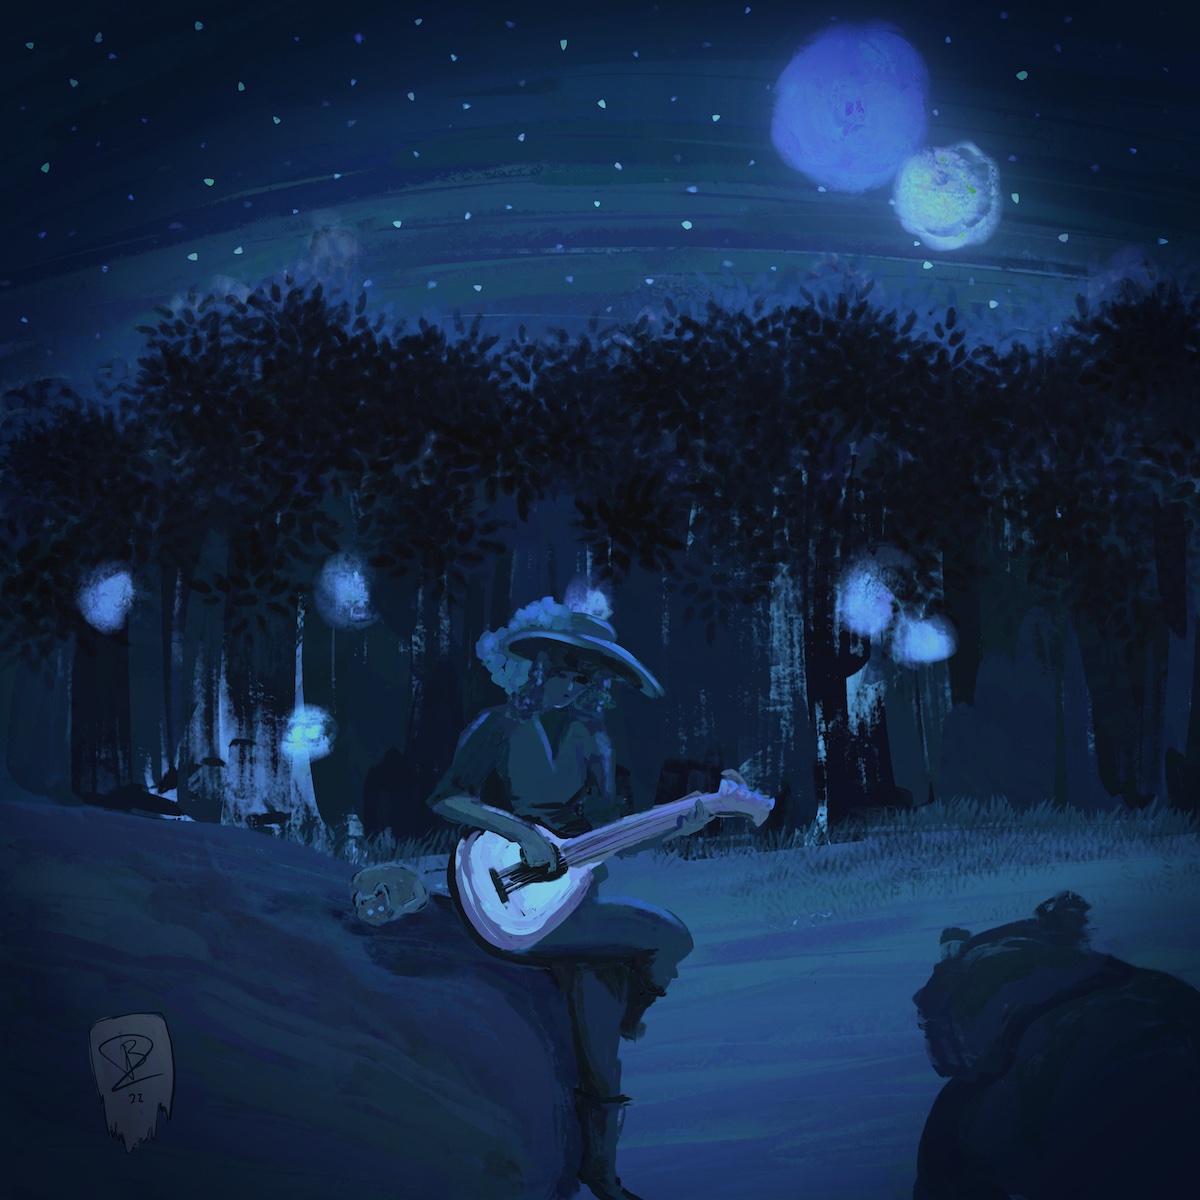 A woman plays an instrument that looks like a cross between a lute and a guitar. She has on a wide-brimmed hat with a feather in it. She’s sitting on a rock. The cat is hiding behind her. In the foreground, a bear watches her. Is it charmed by her song, or preparing to strike? Behind them is a dark forest with some mysterious lights glowing through the trees. The stars are out, and both the moons are full.